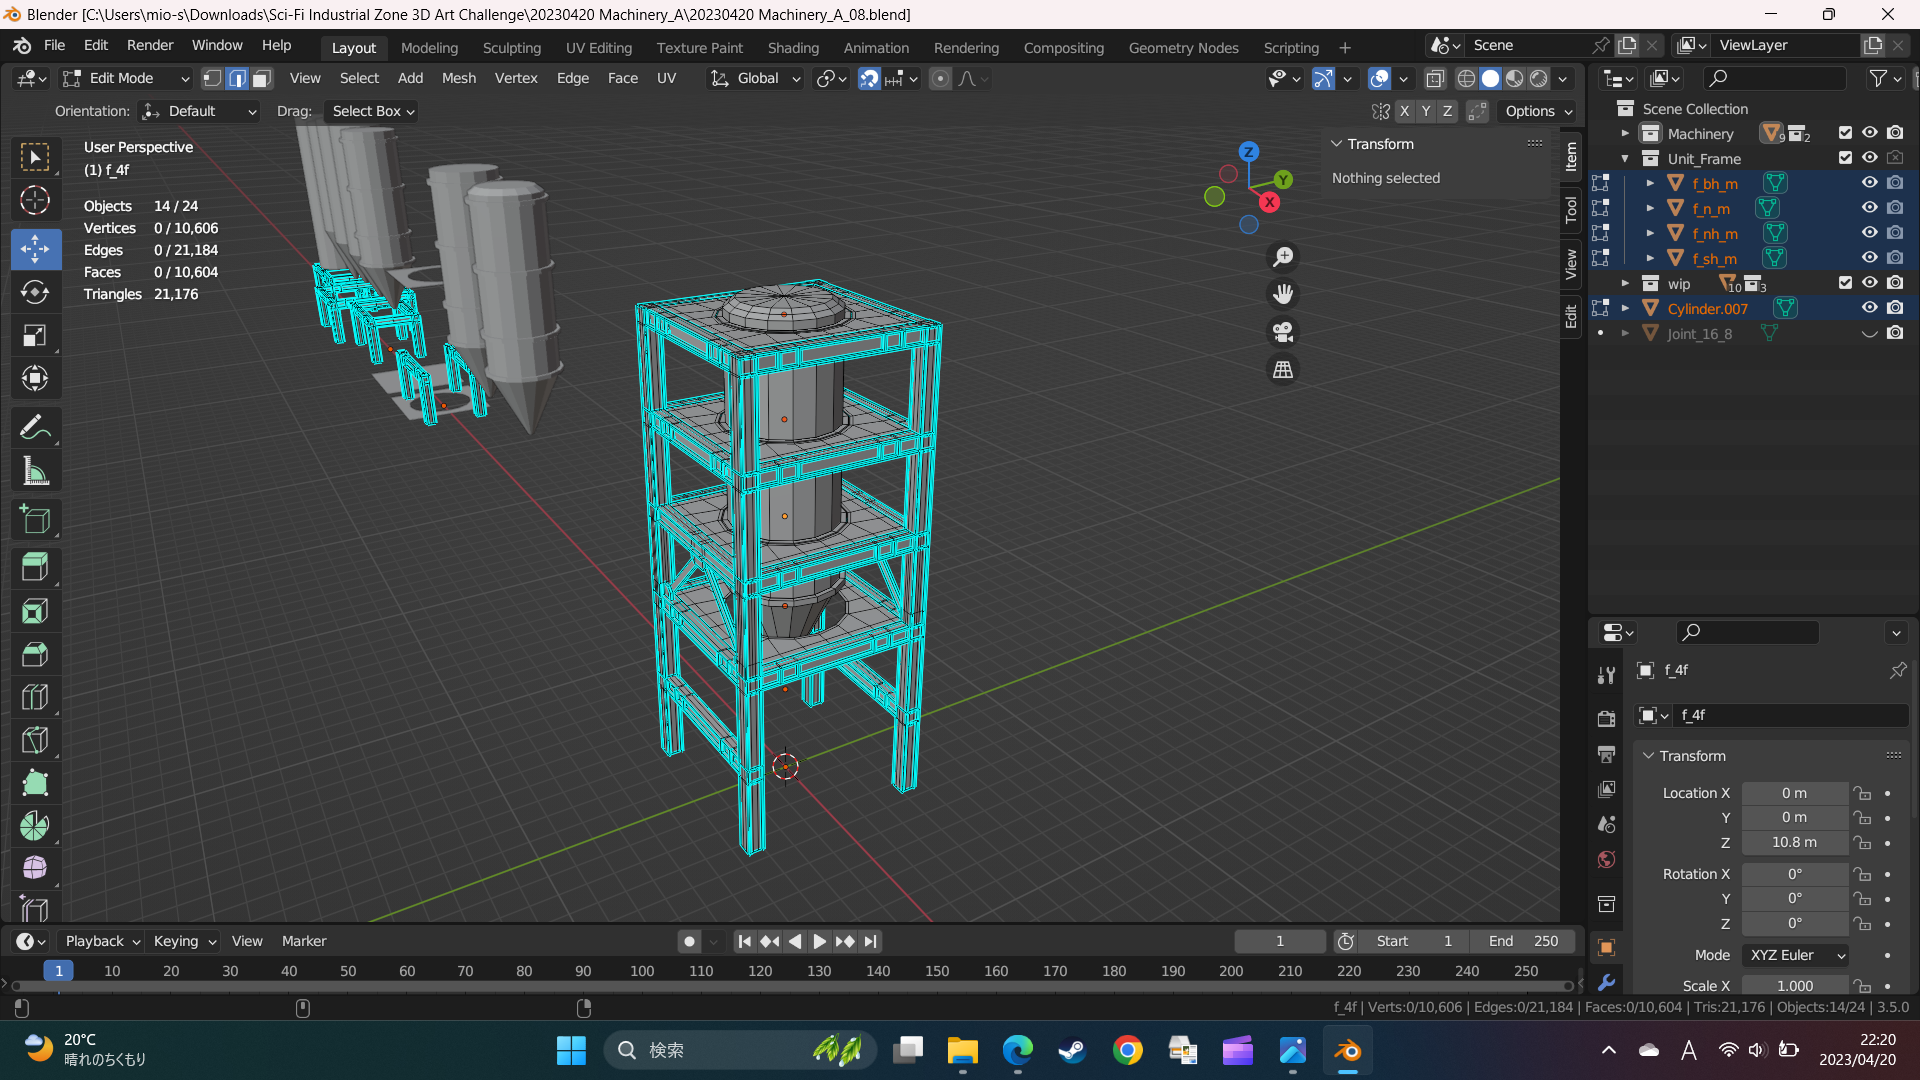 Sci-Fi Industrial Zone 3D challenge - Manufacturing plant